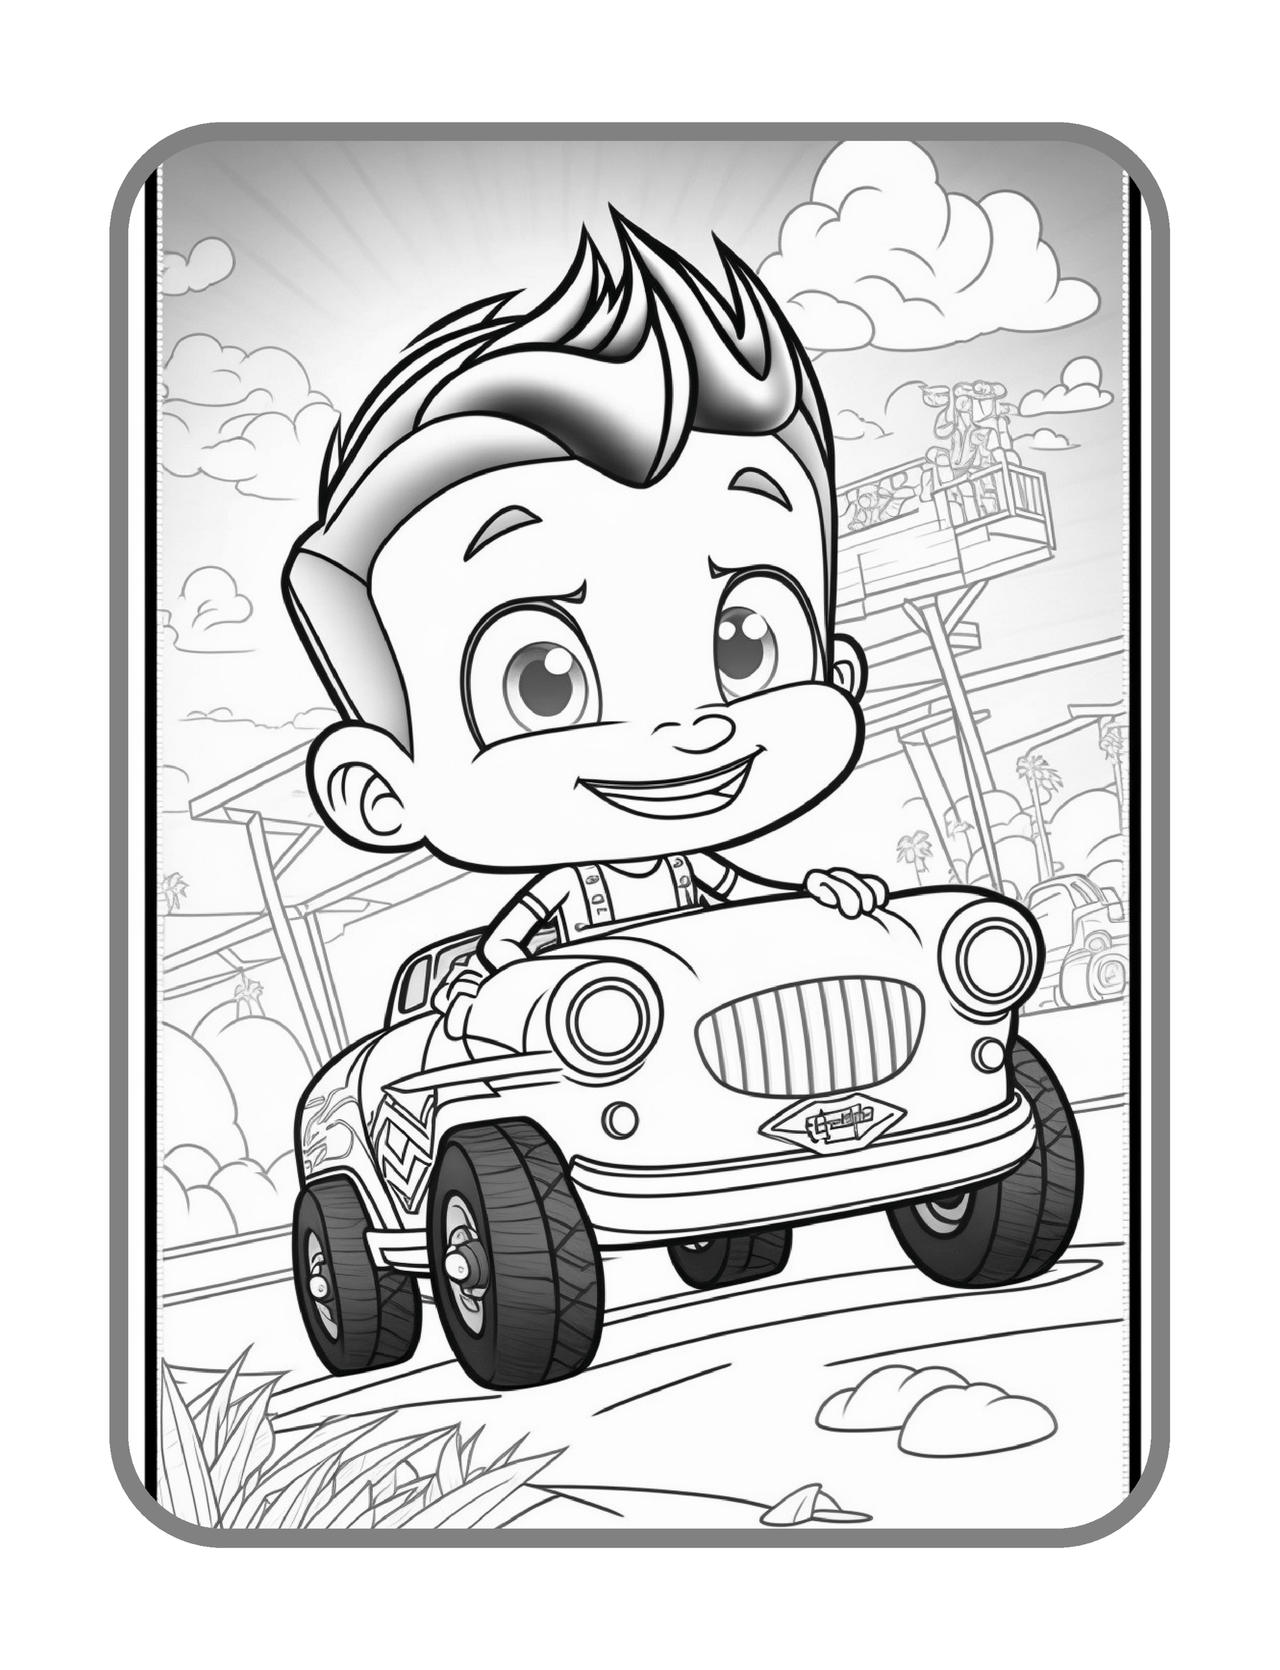 Cars And Vehicles Coloring Books For Boys: 46 Unique Coloring Pages, Cool  Cars, boy coloring book, color books, and Car Lovers (Large Print /  Paperback)